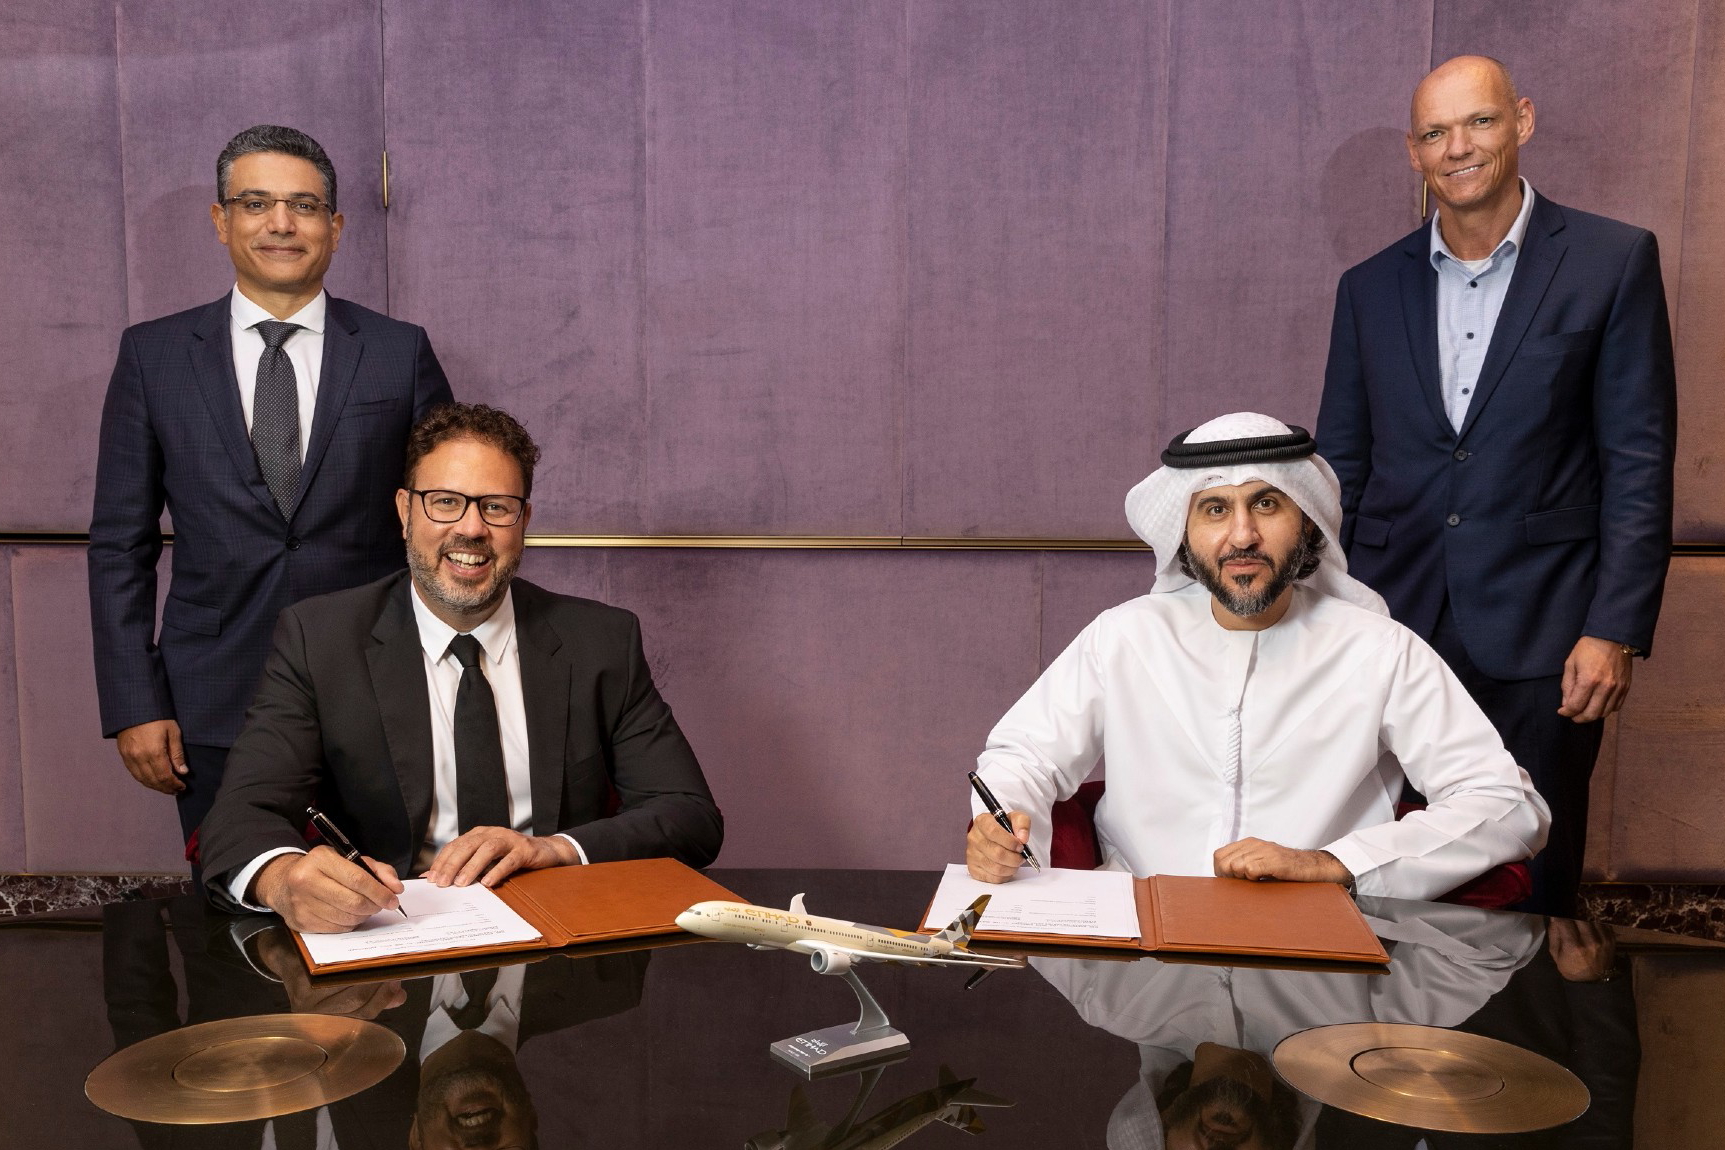 Etihad Airways has signed a multi-year technology agreement with Amadeus that will see it implement the full Amadeus Altéa PSS suite, including web booking, revenue management and merchandising, data management and passenger servicing solutions. Click to enlarge.